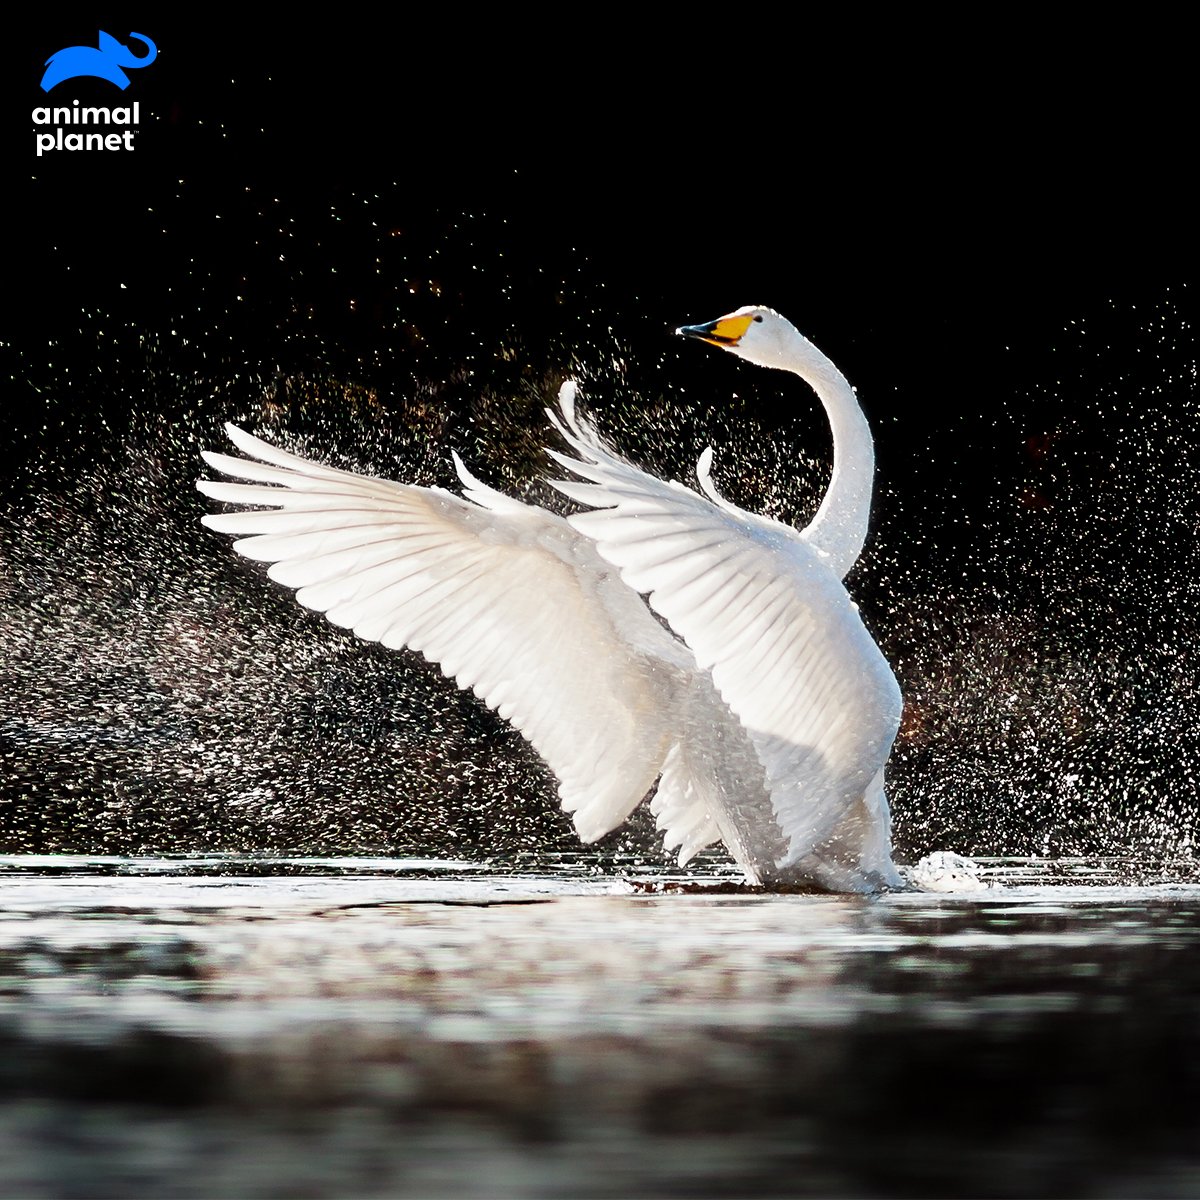 Animal Planet India on Twitter: "Flapping to the tune! Whooper swans are  the most elegant member of the swan family. When they fly, their wings  create a melodic tune. #WeirdAnimalFacts… *****hb4LrtZ1uW"